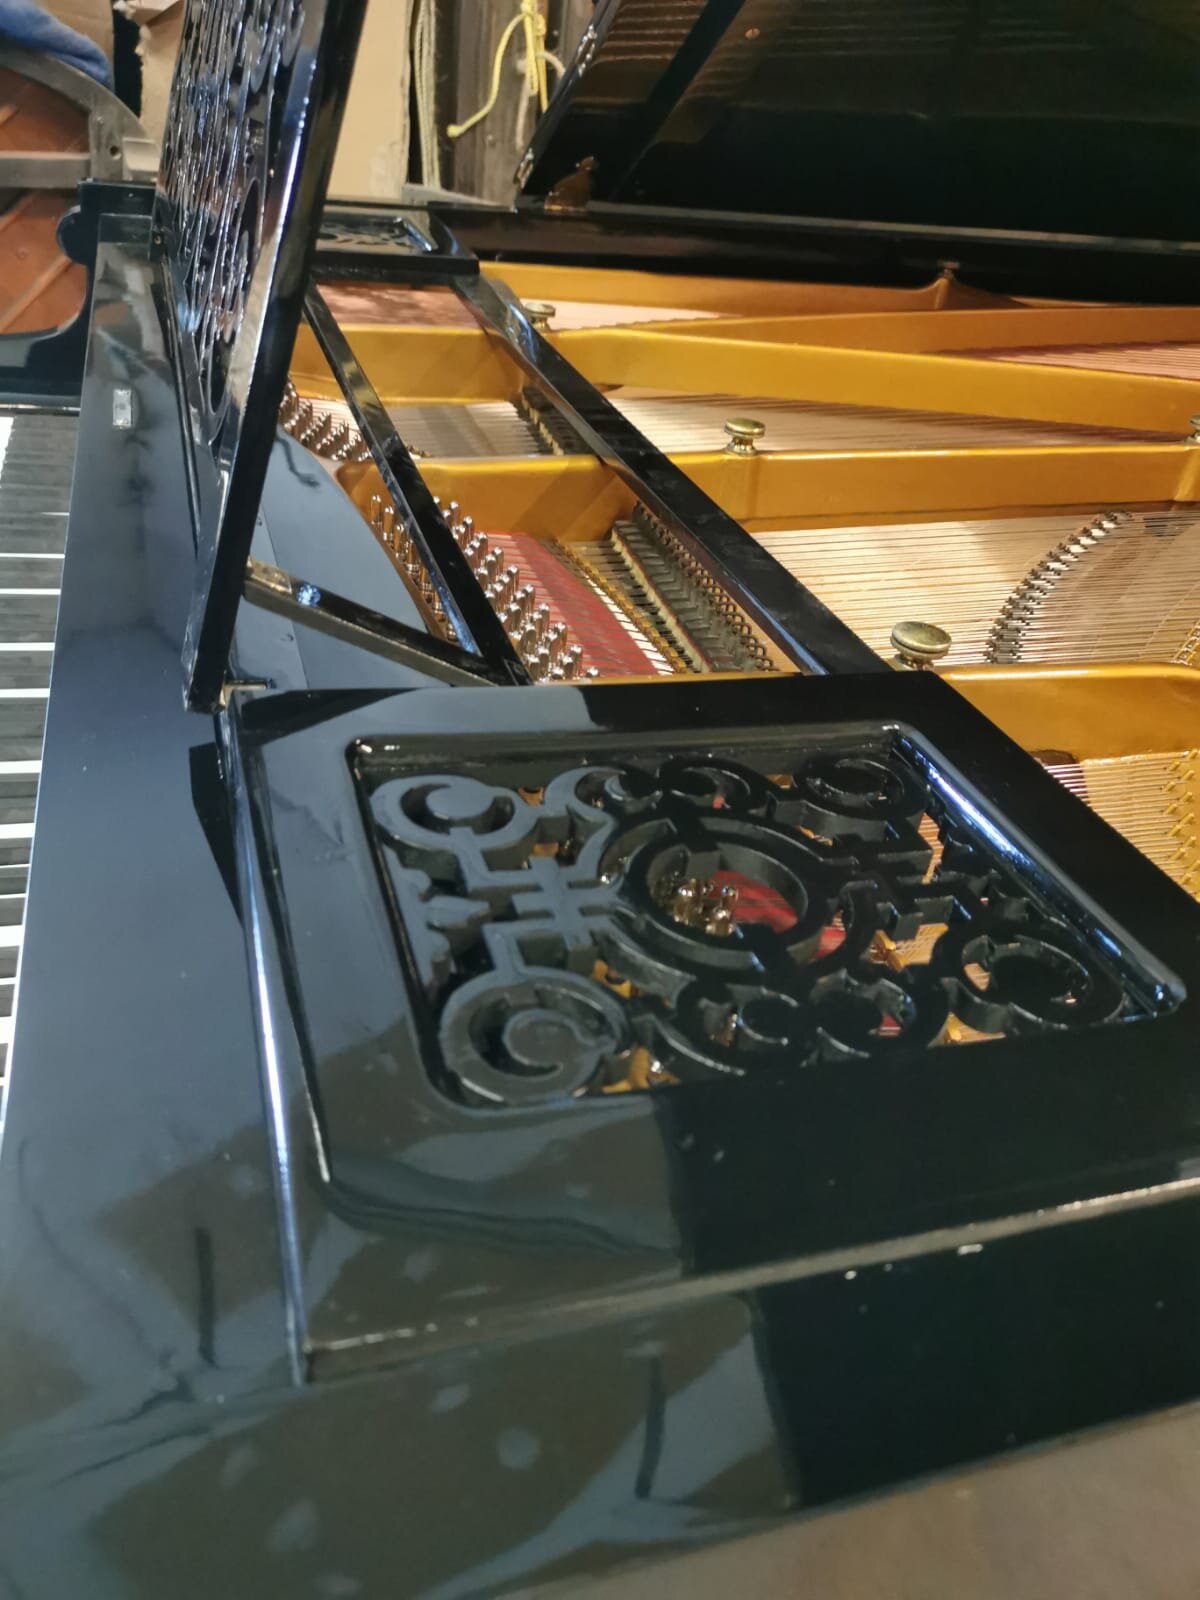 Chickering piano for sale6.jpeg